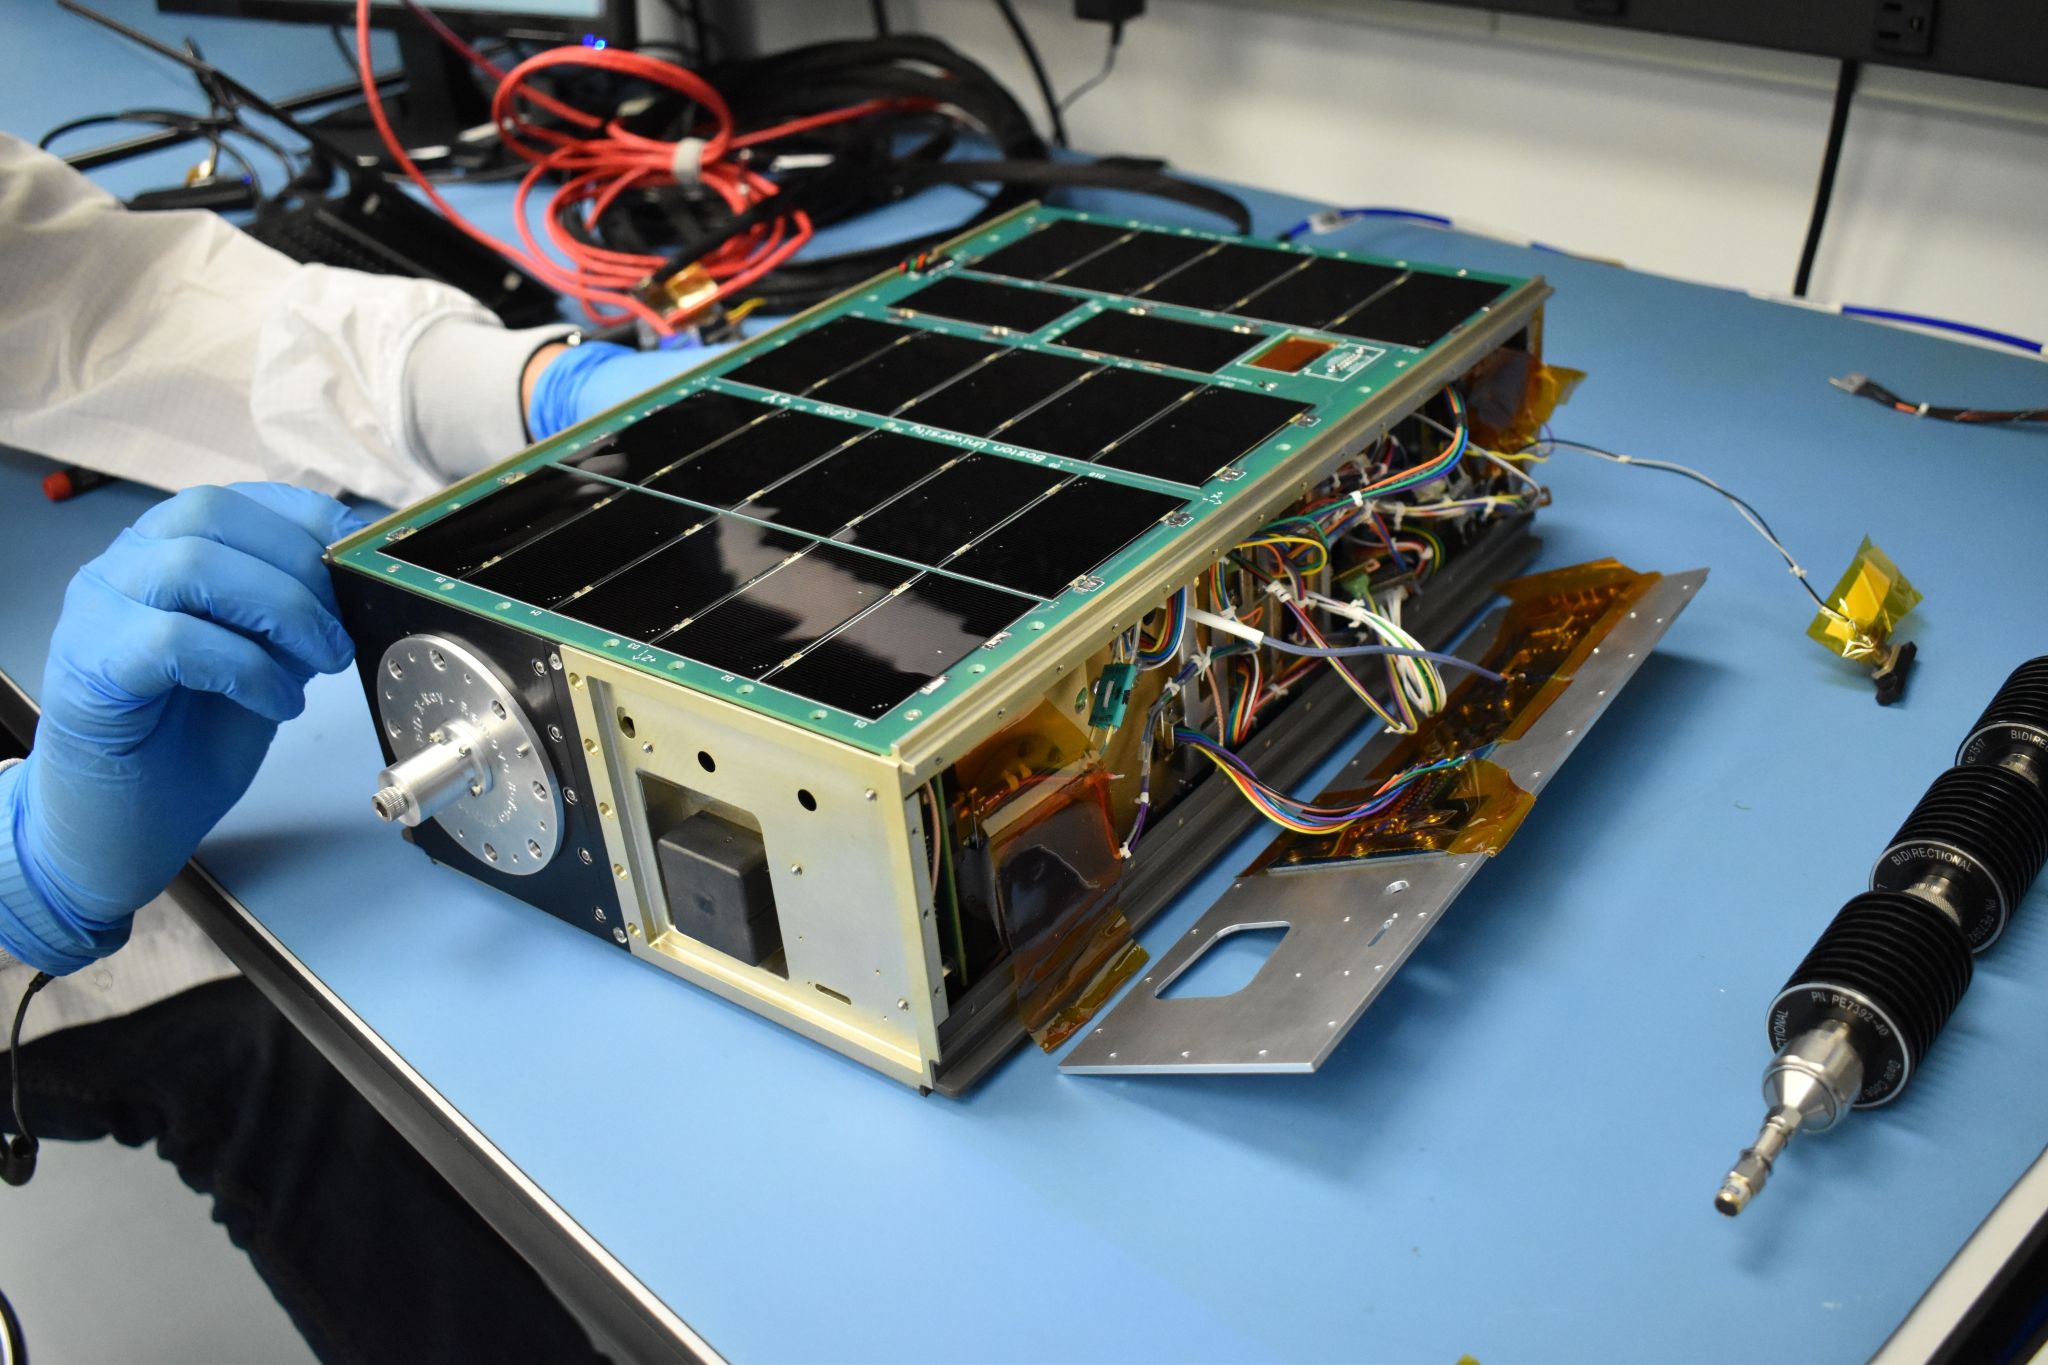 A cereal-box sized satellite with some wiring exposed sits on a table while someone with gloved hands works on it